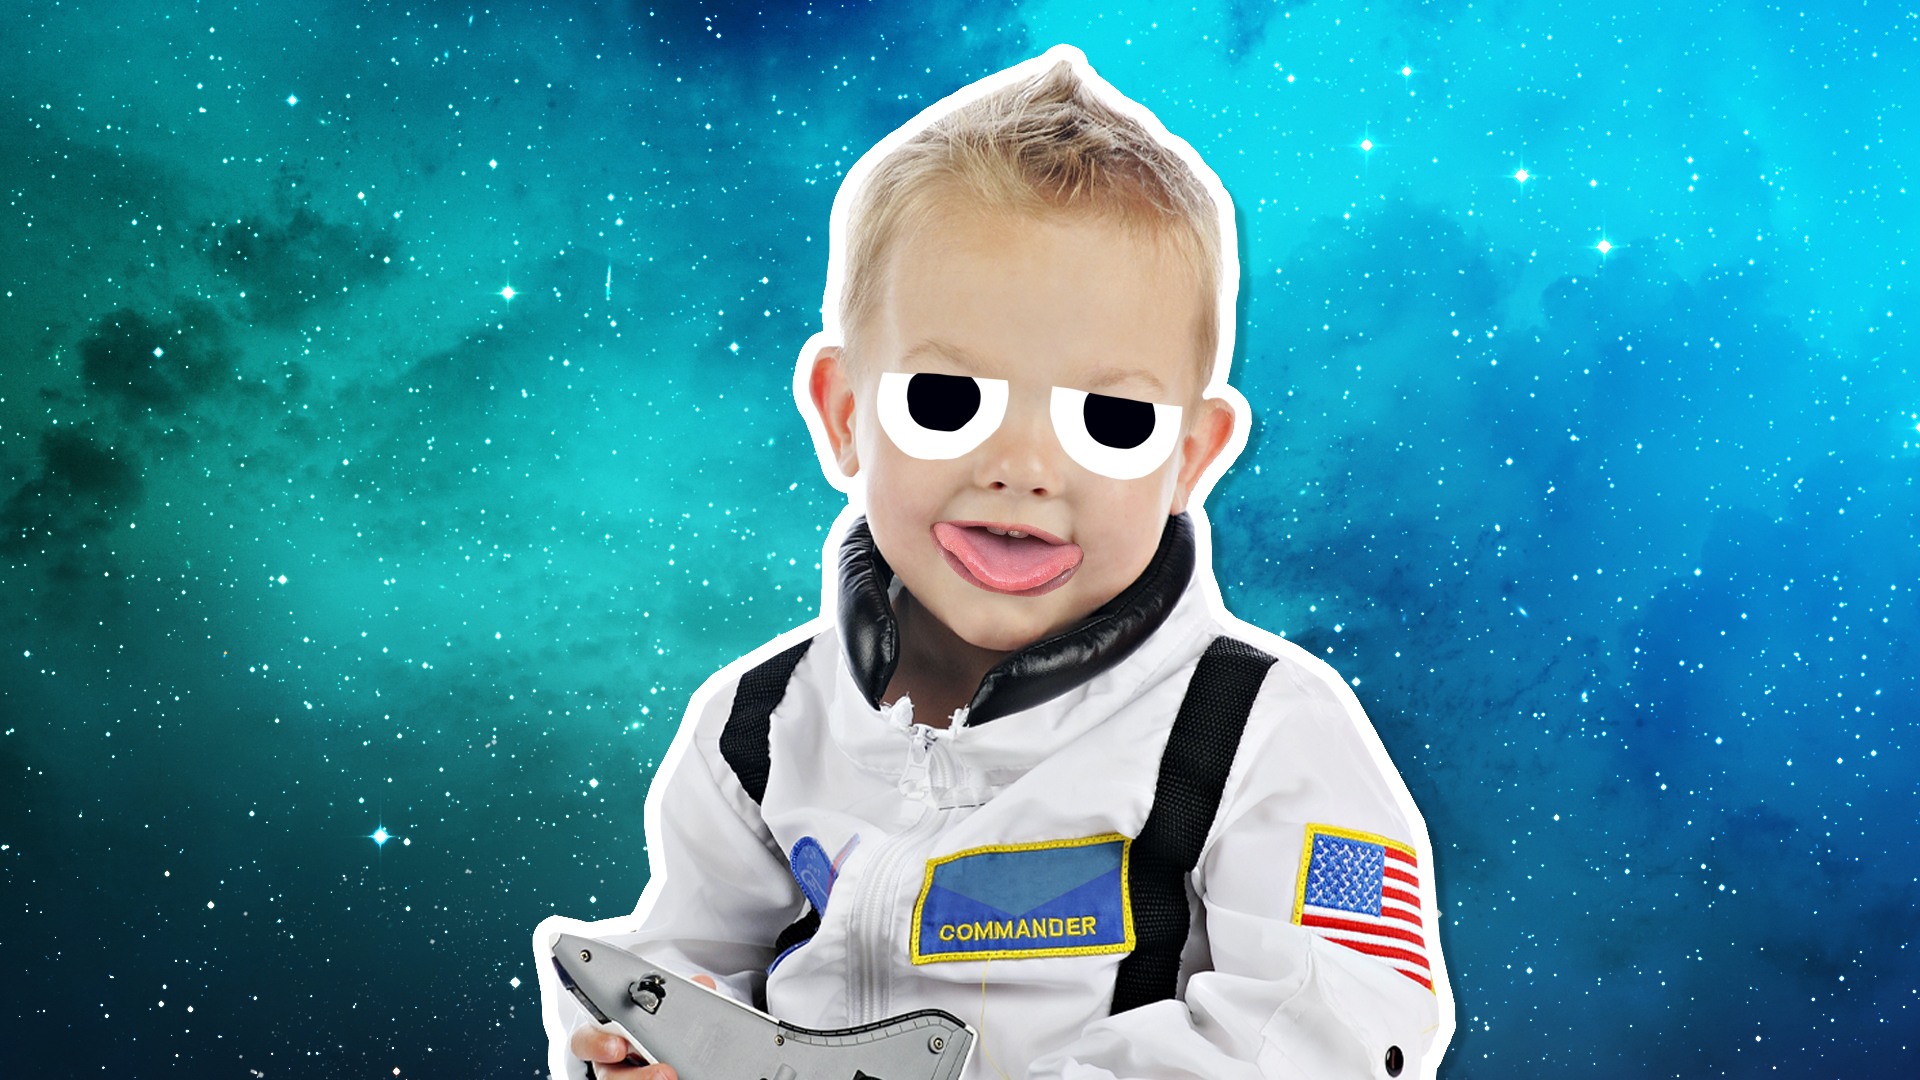 A young astronaut